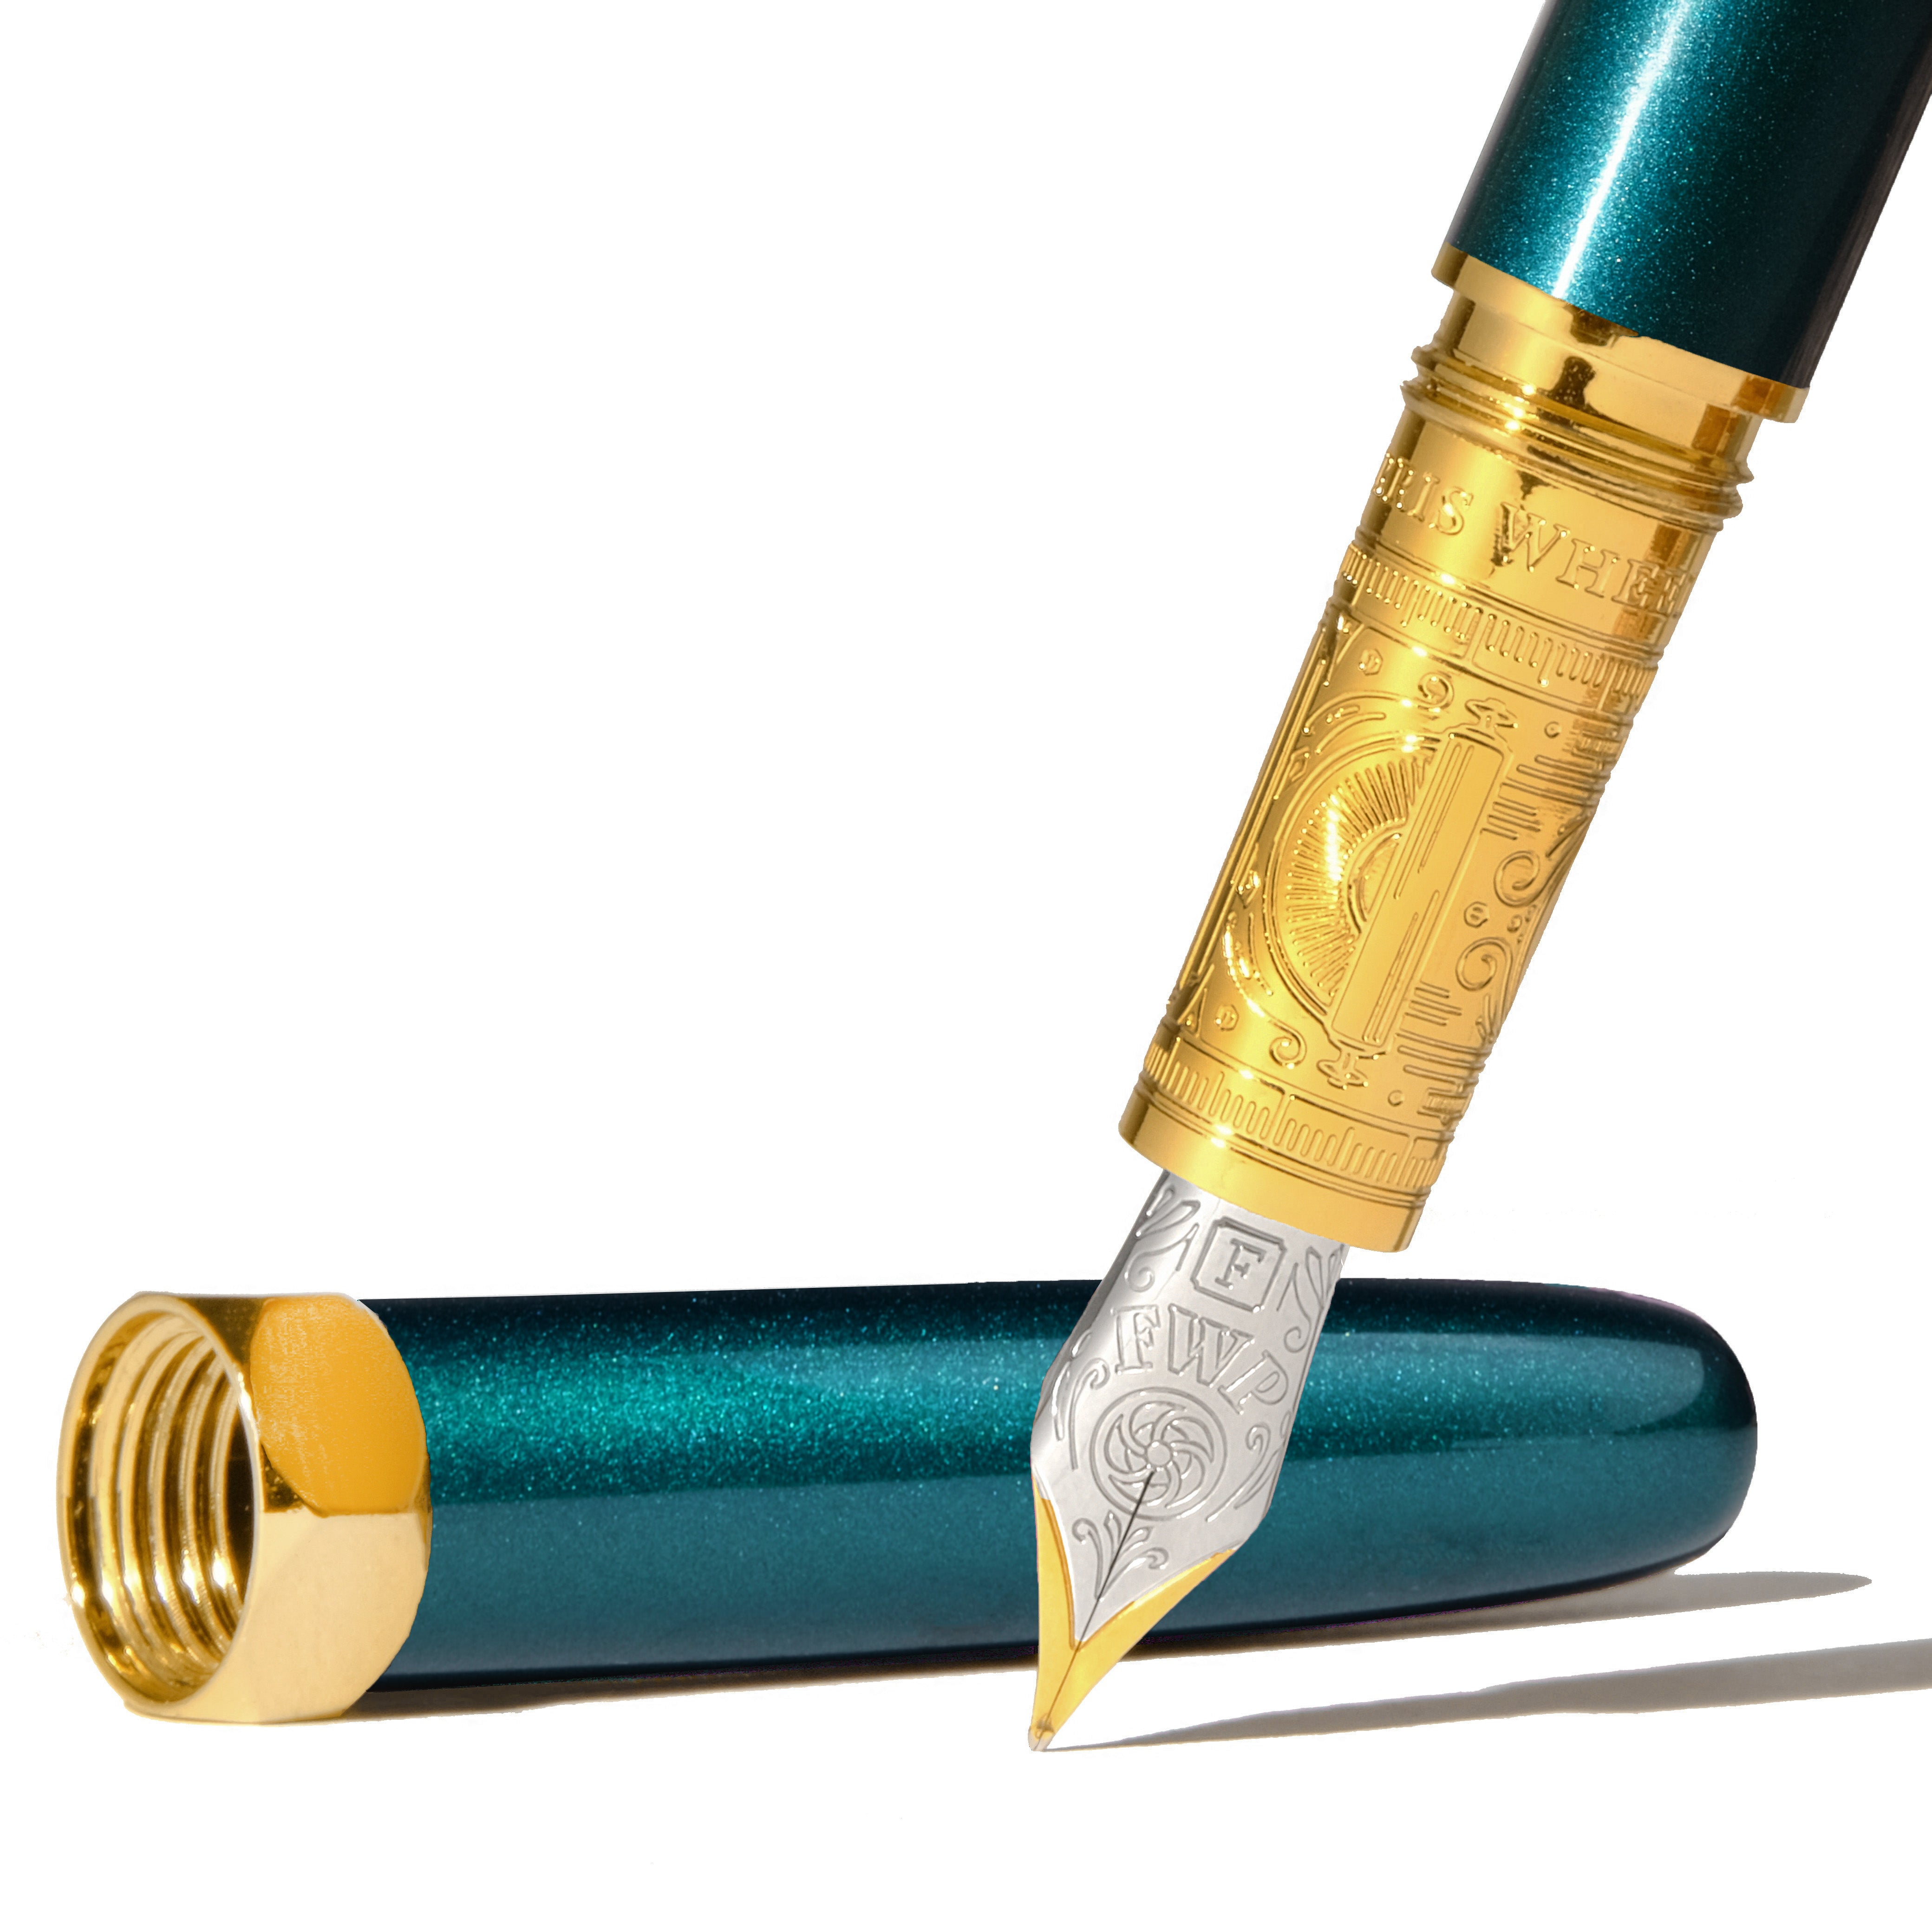 What is a Fountain Pen?